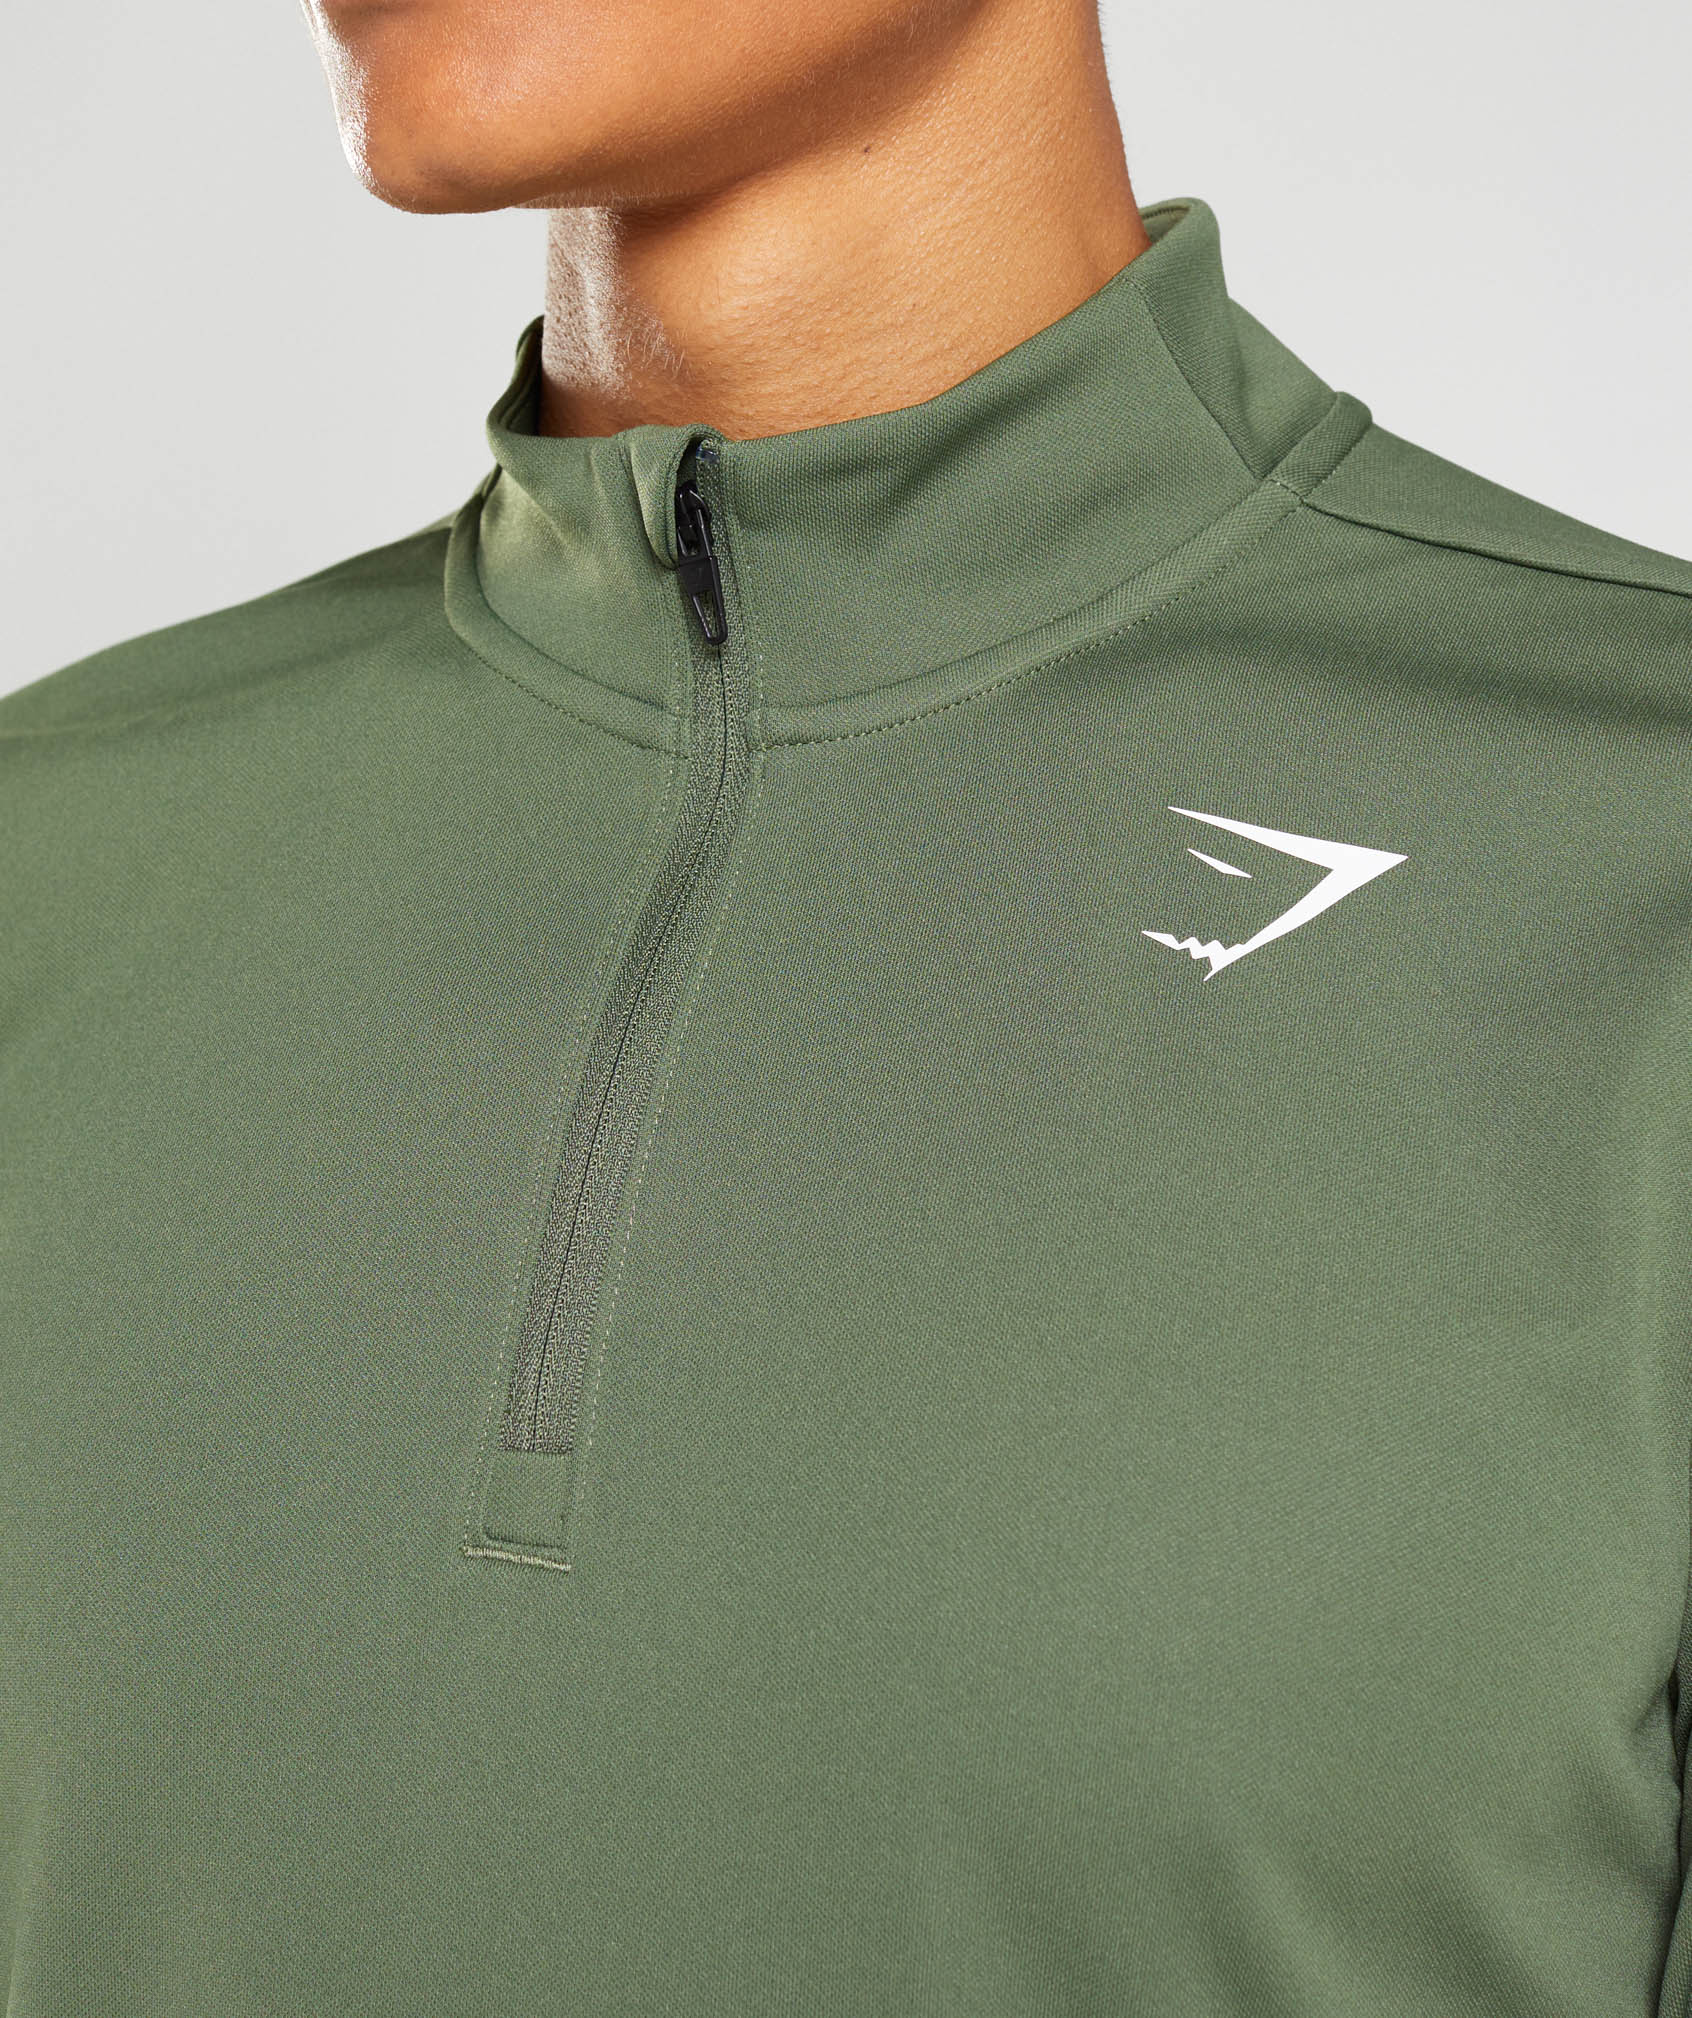 Arrival 1/4 Zip Pullover in Core Olive - view 2